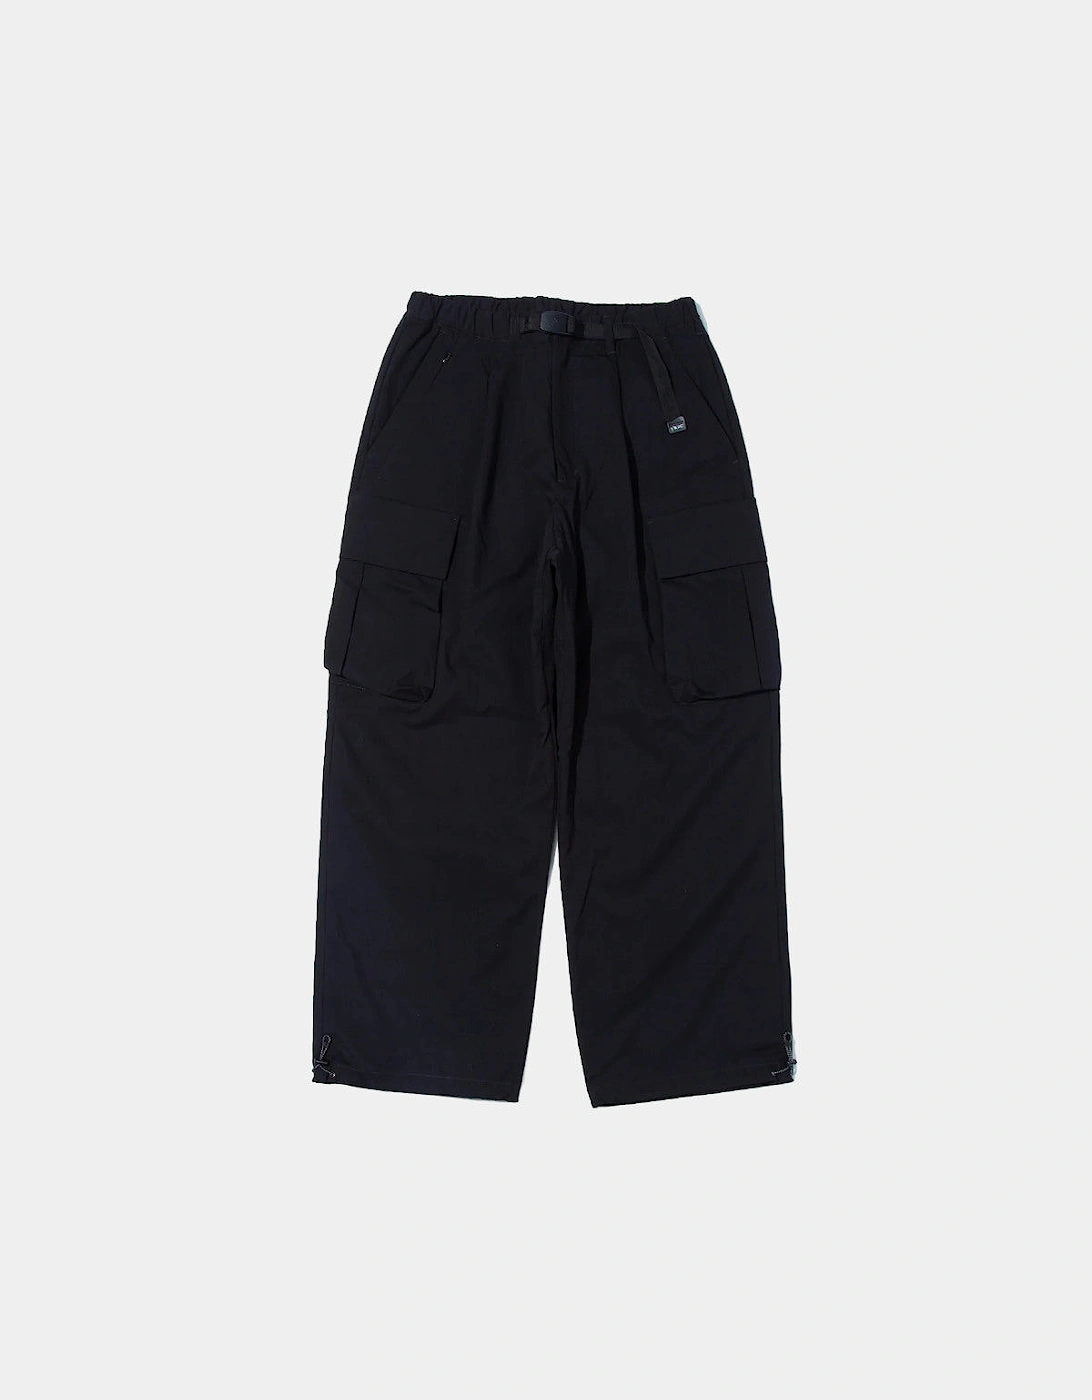 by F/CE. Technical Cargo Wide Pant - Black, 14 of 13